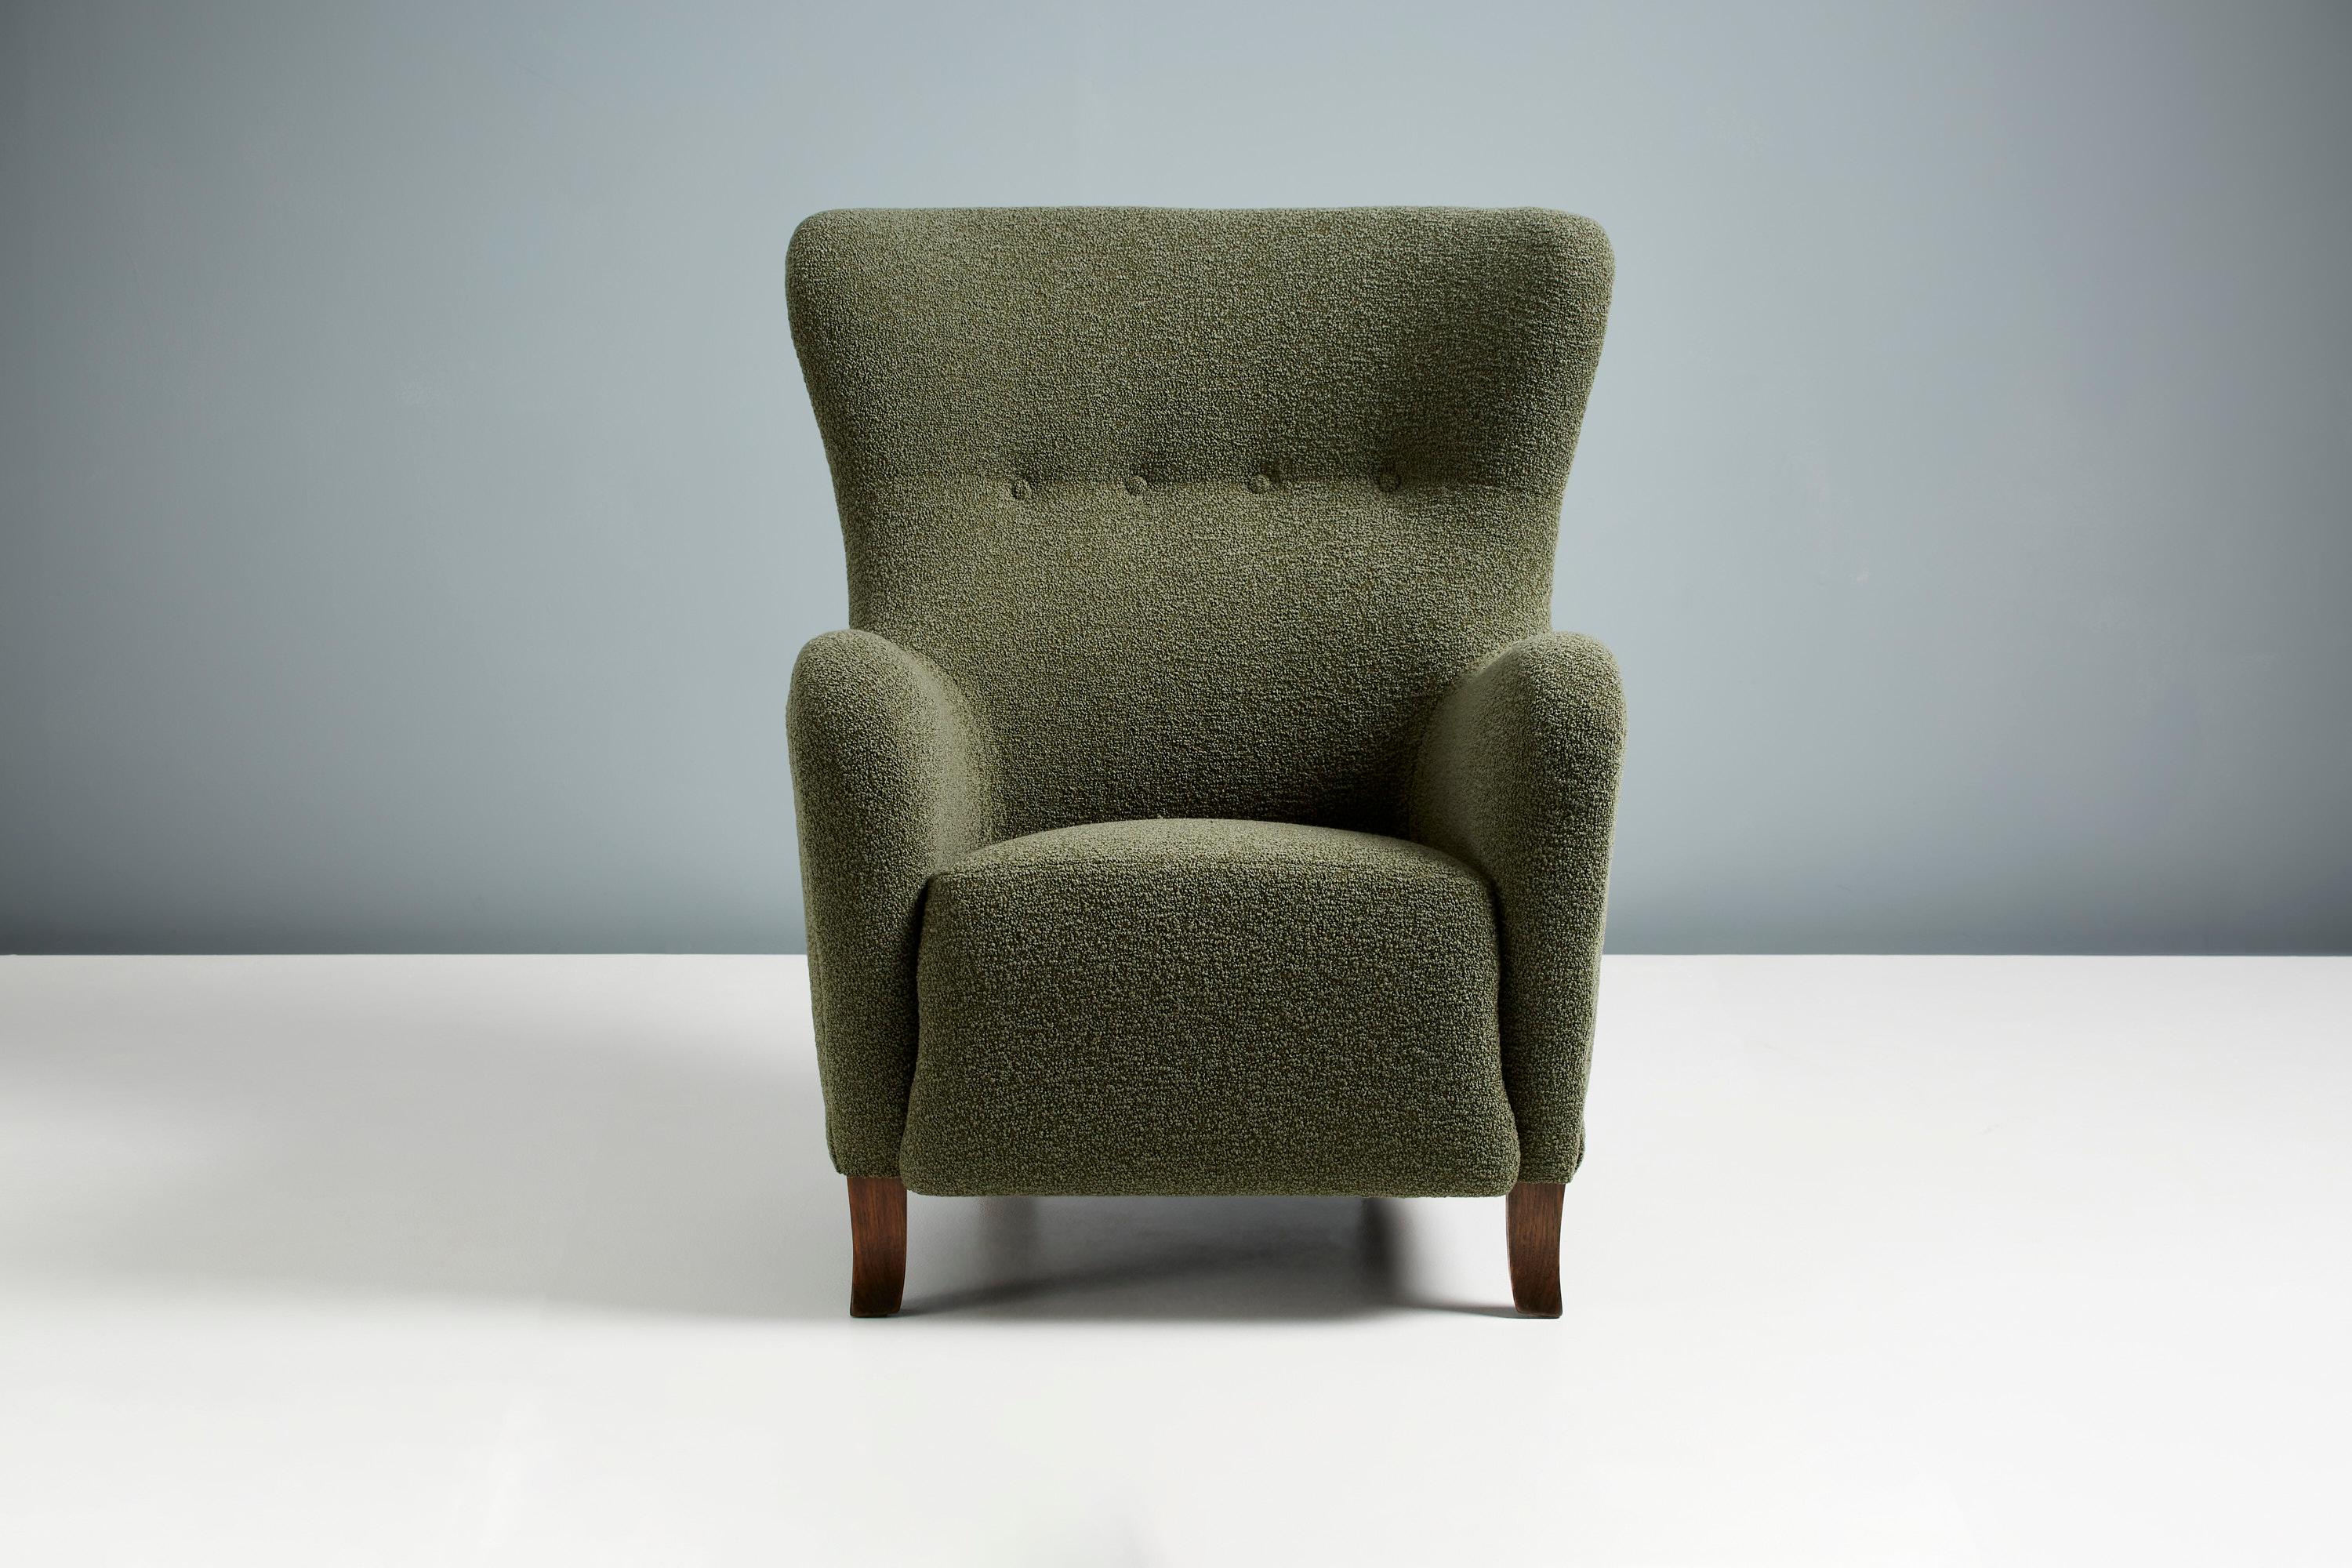 Dagmar design Sampo wing chair

A custom-made wing chair developed & produced at our workshops in London using the highest quality materials. The frame is built from solid tulipwood with a fully sprung seat. This example is upholstered in a deep